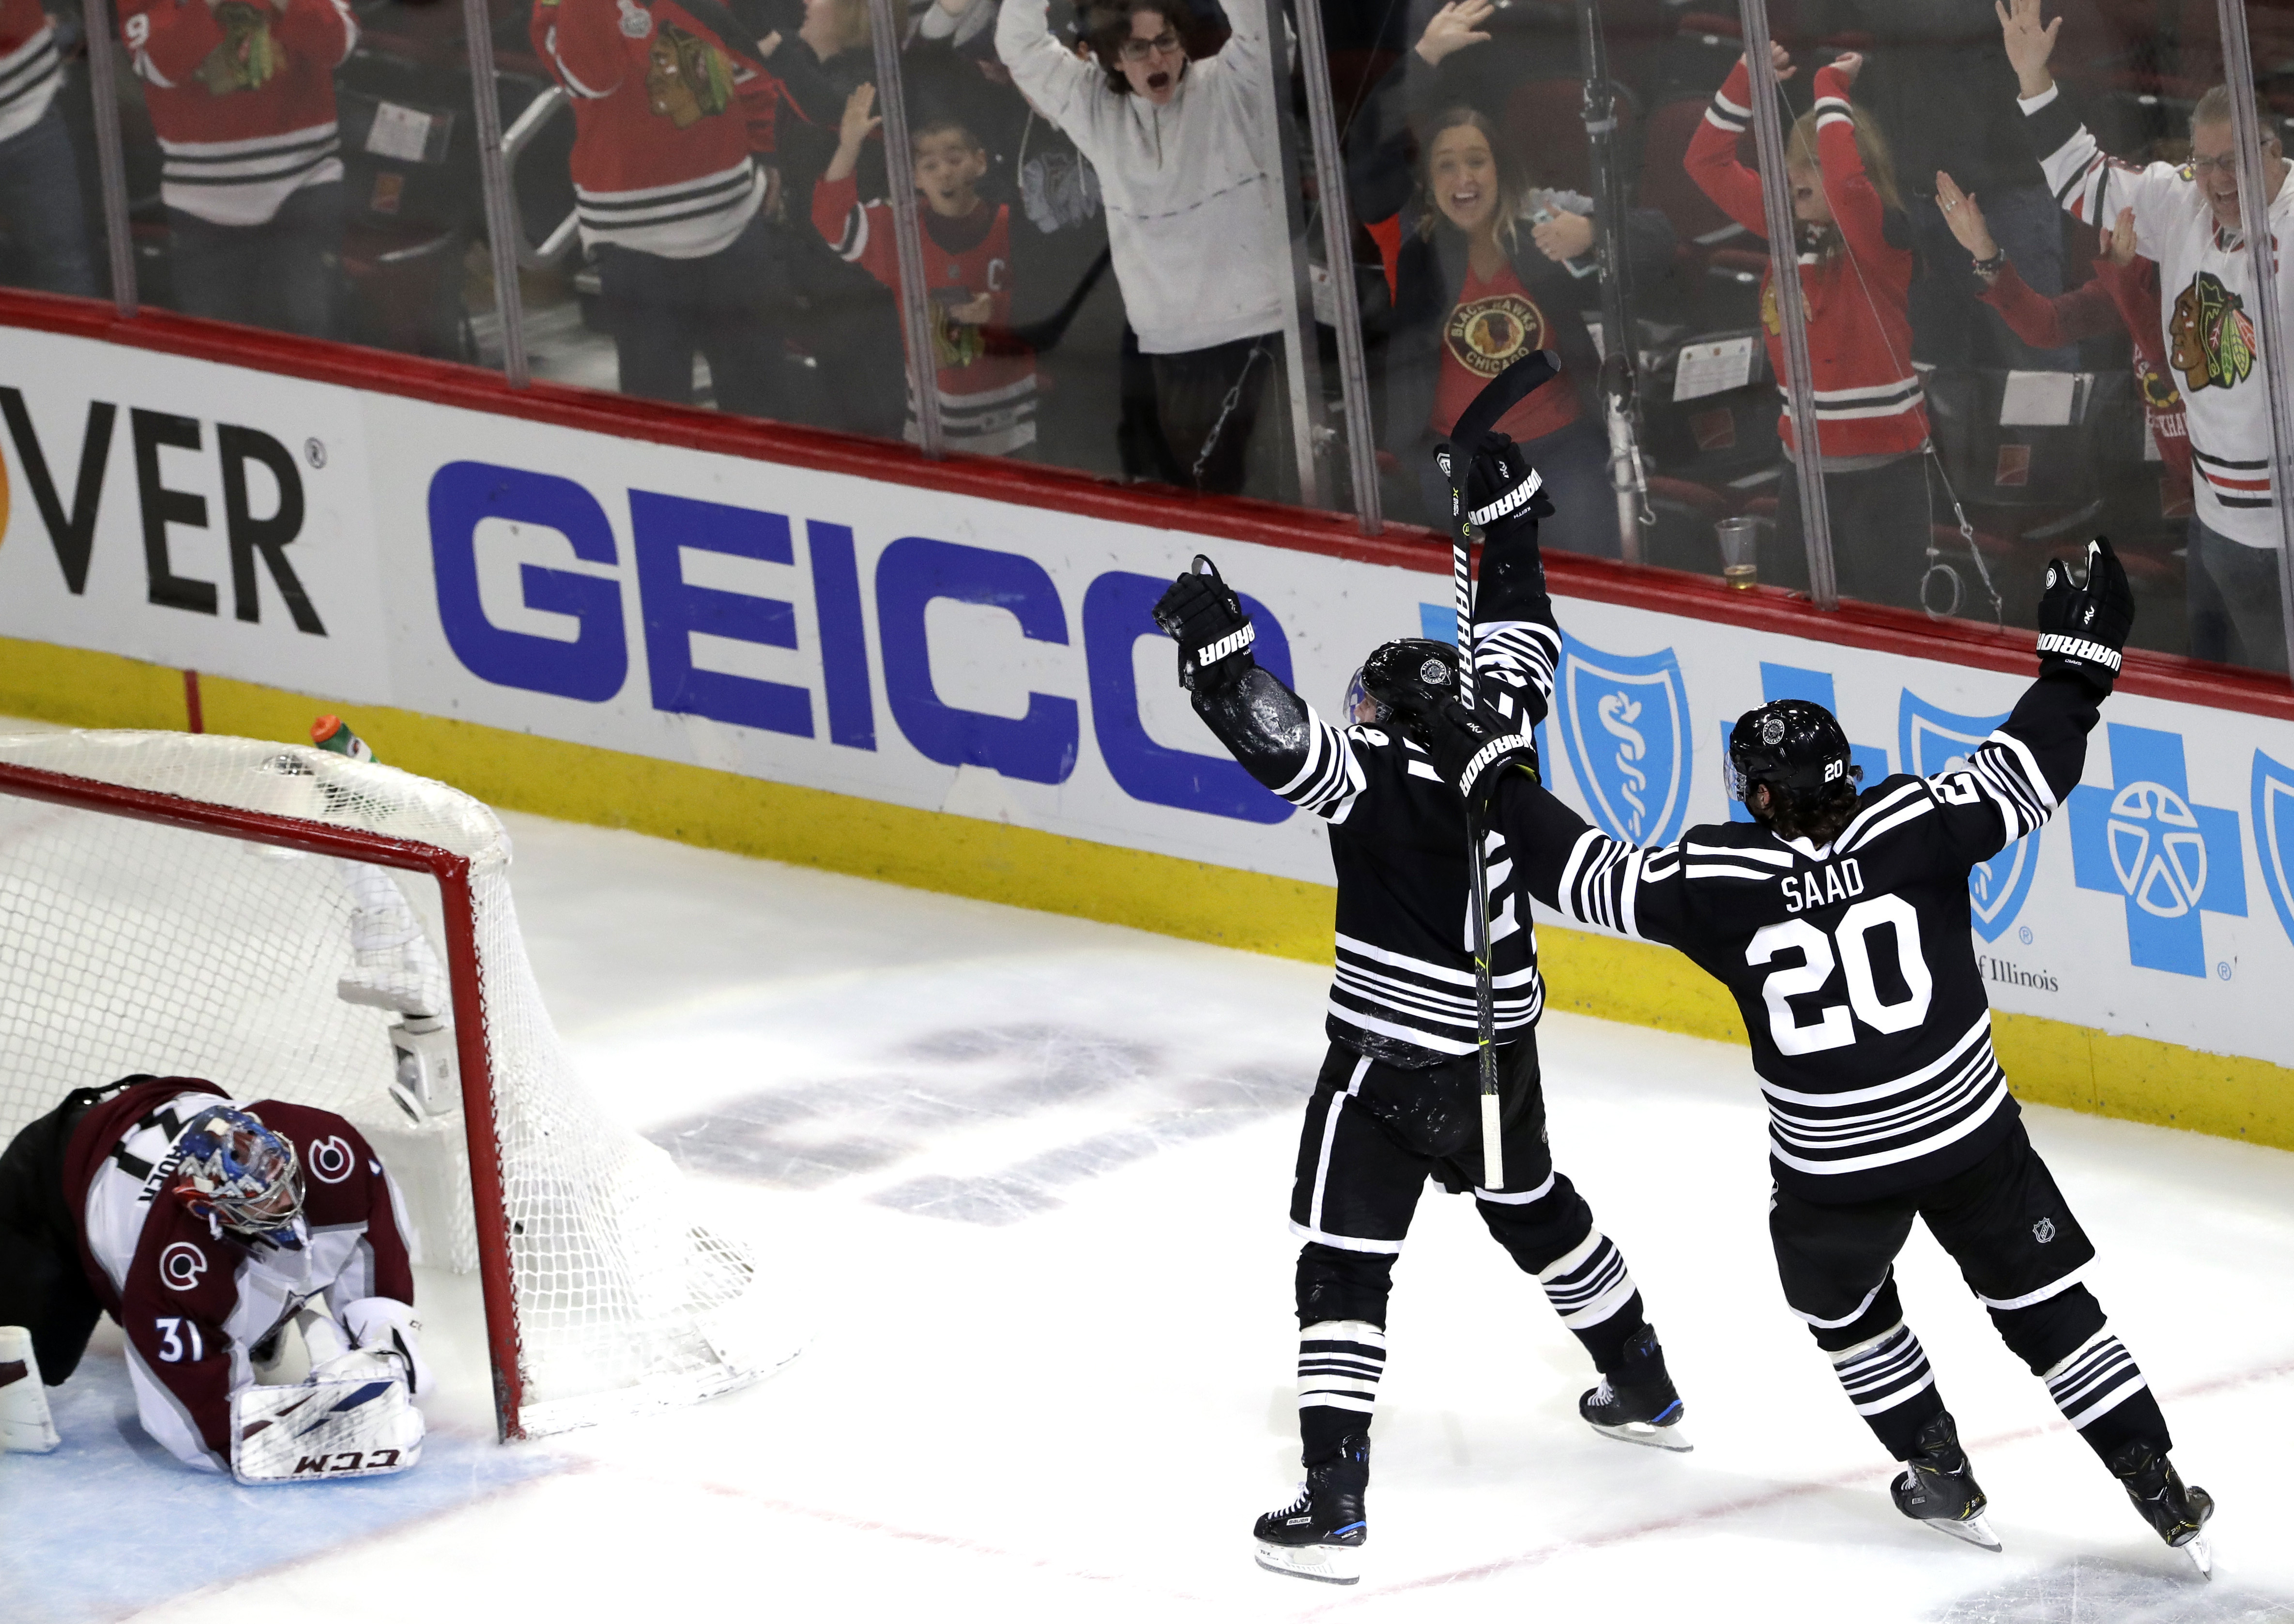 Keith scores in OT to lift Blackhawks over Avalanche 2-1